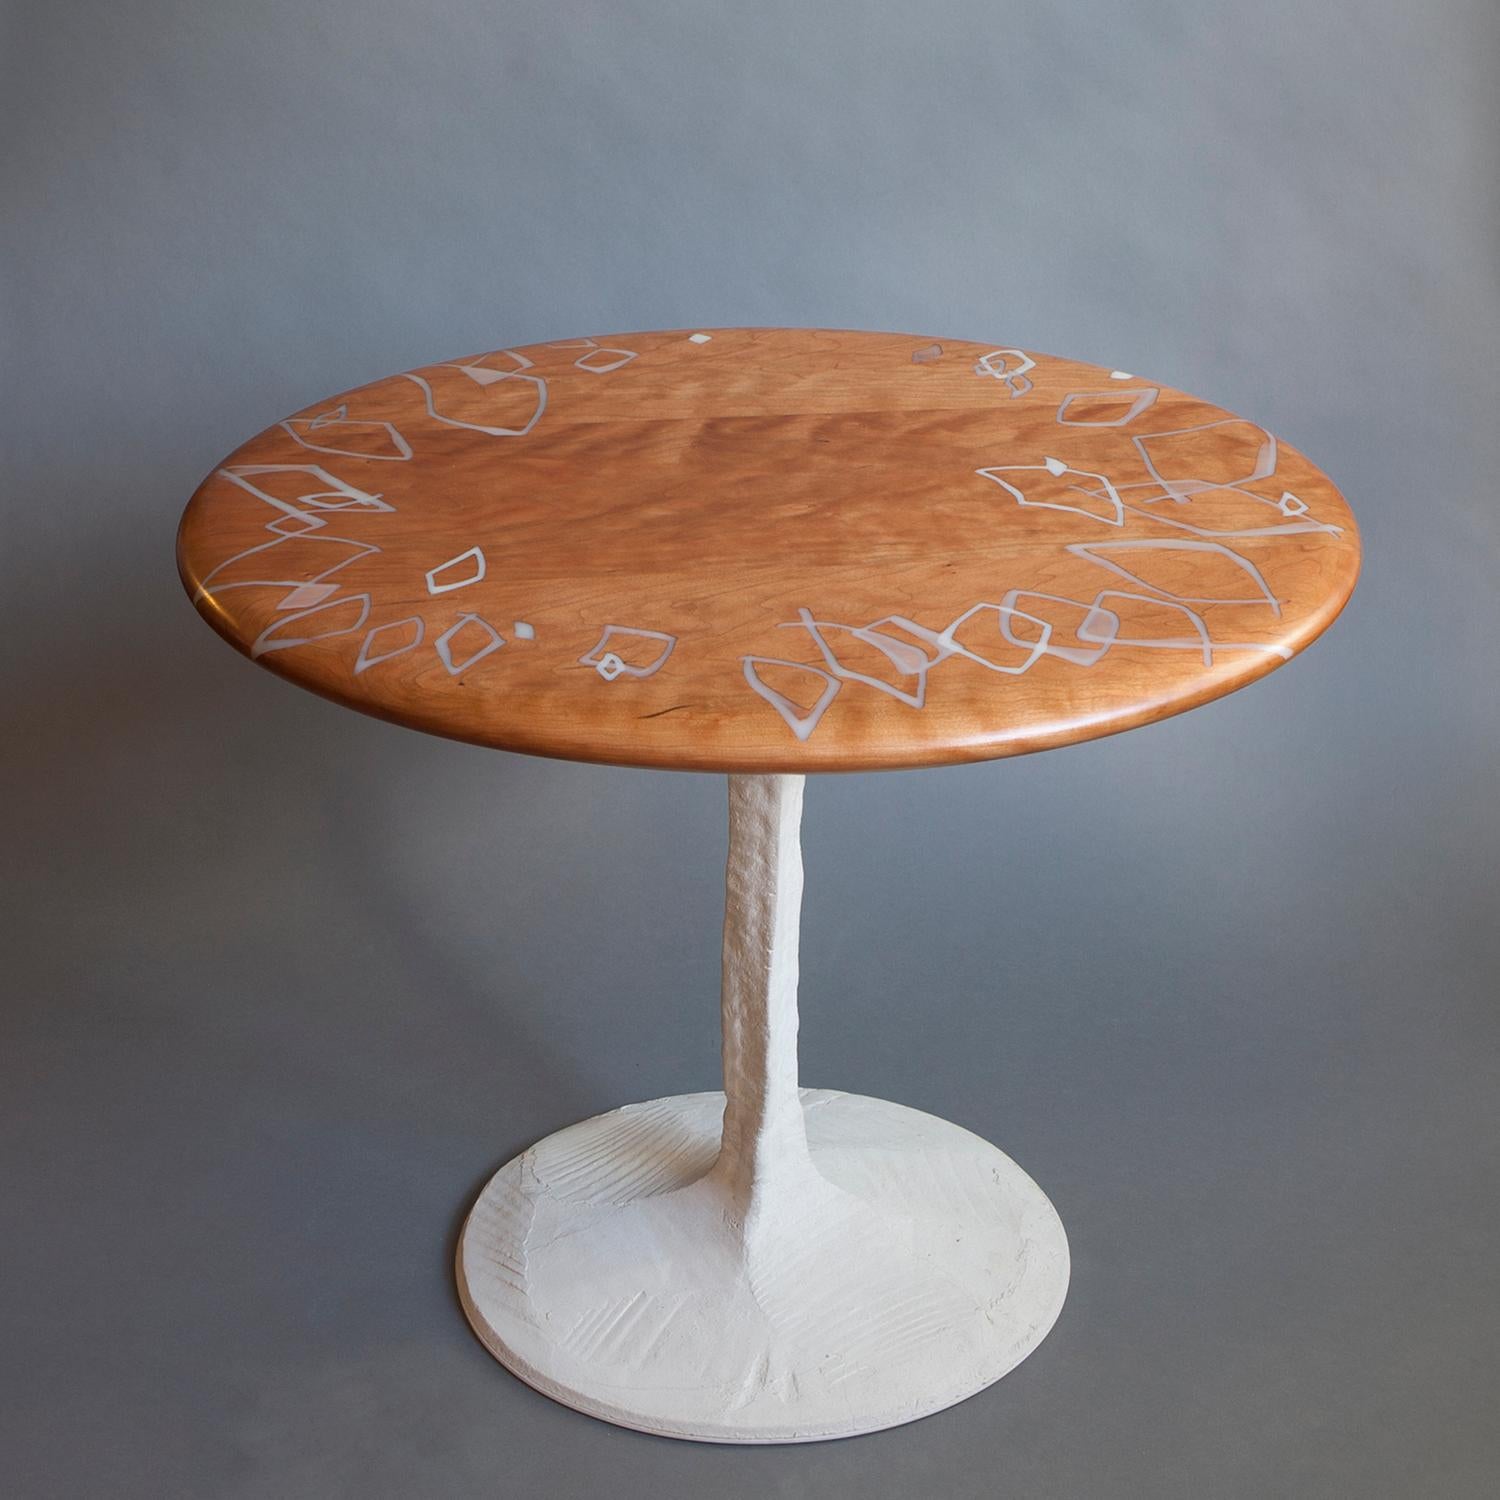 American Sky with Diamonds Side Table in Cherry with Concrete Pedestal Base - IN STOCK For Sale